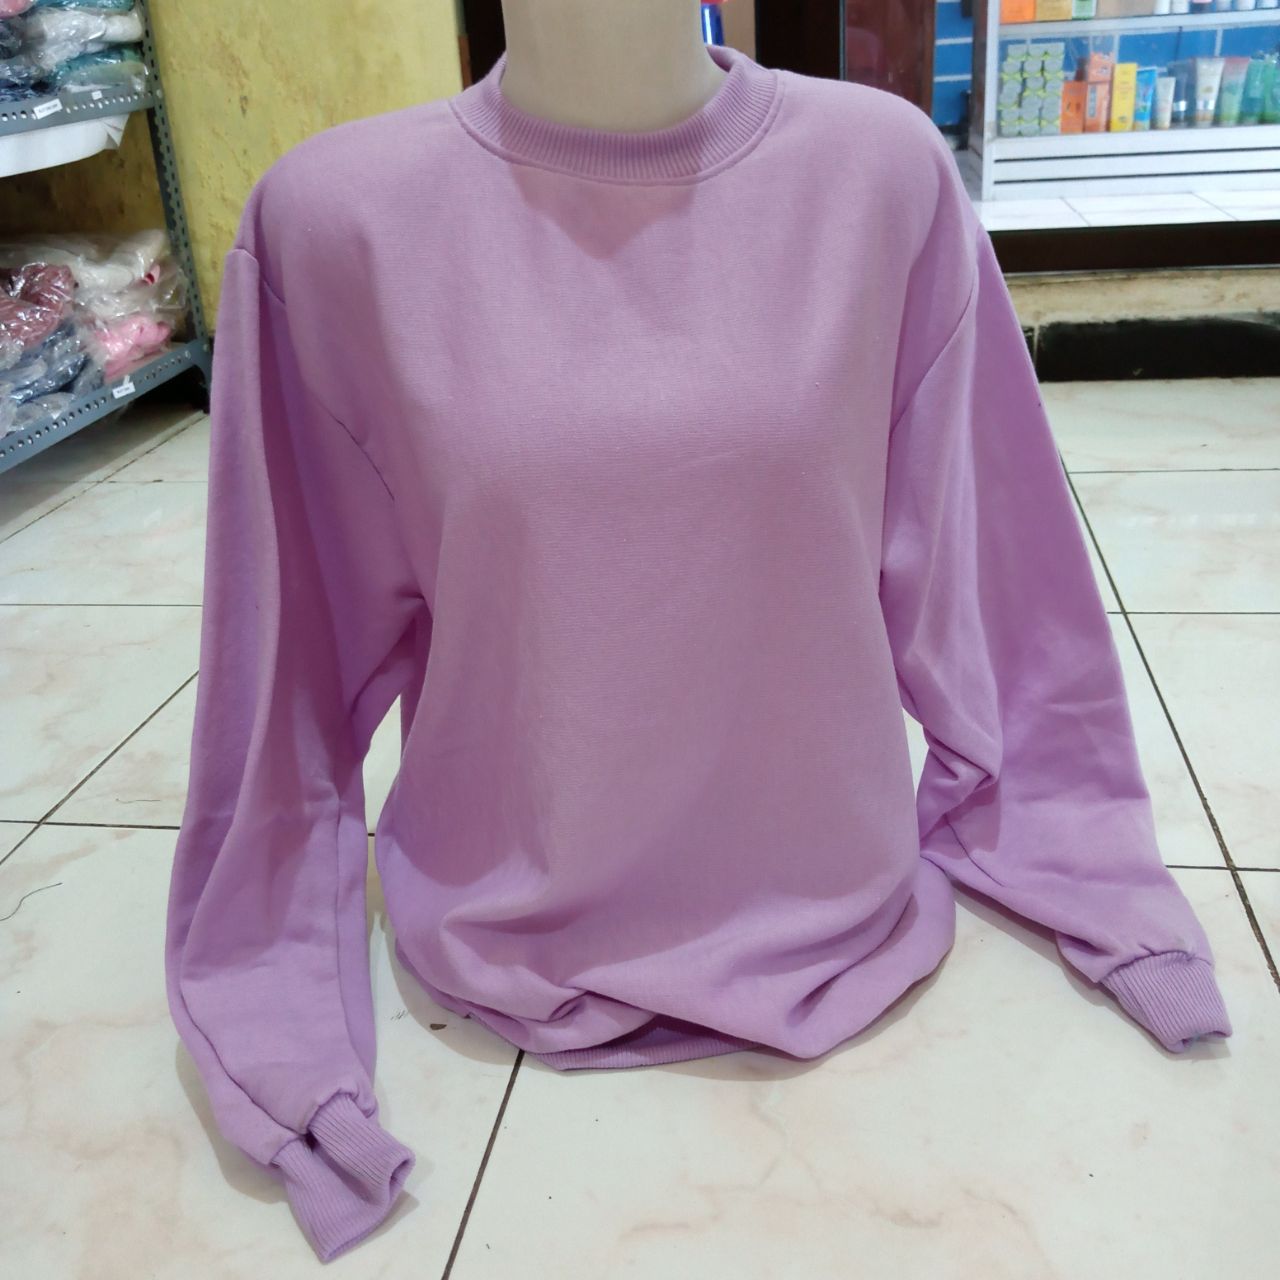 ini adalah Sweater Polos Lilac, size: LD 90cm, Panjang 60cm, material: Fleece, color: Purple lilac, brand: jaketindonesia, age_group: all ages, gender: unisex